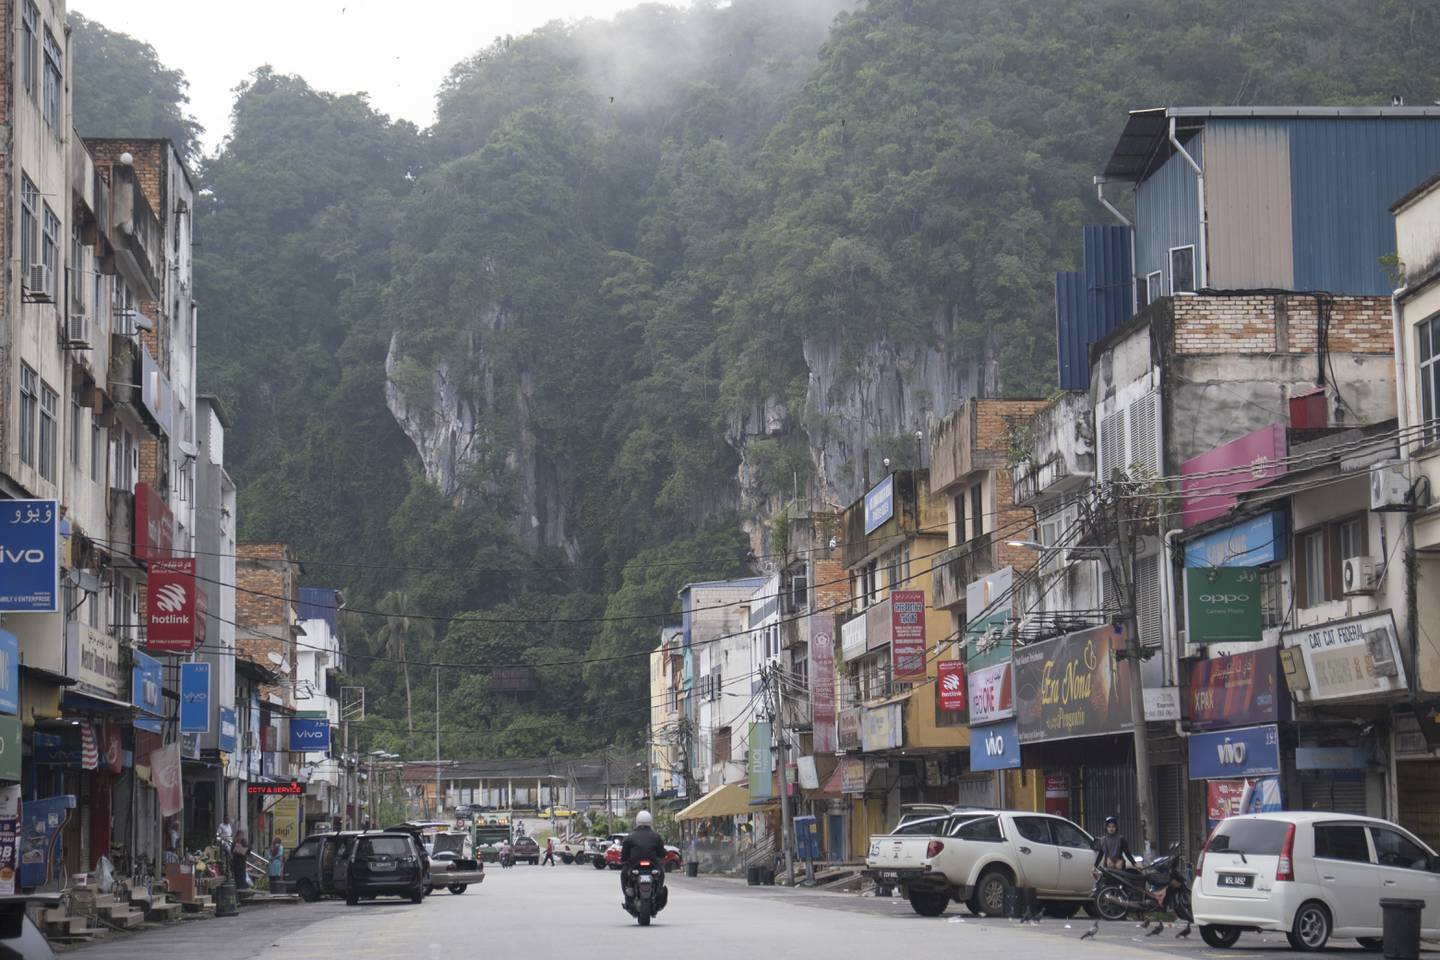 The former logging town of Gua Musang. Photo: Oliver Raw